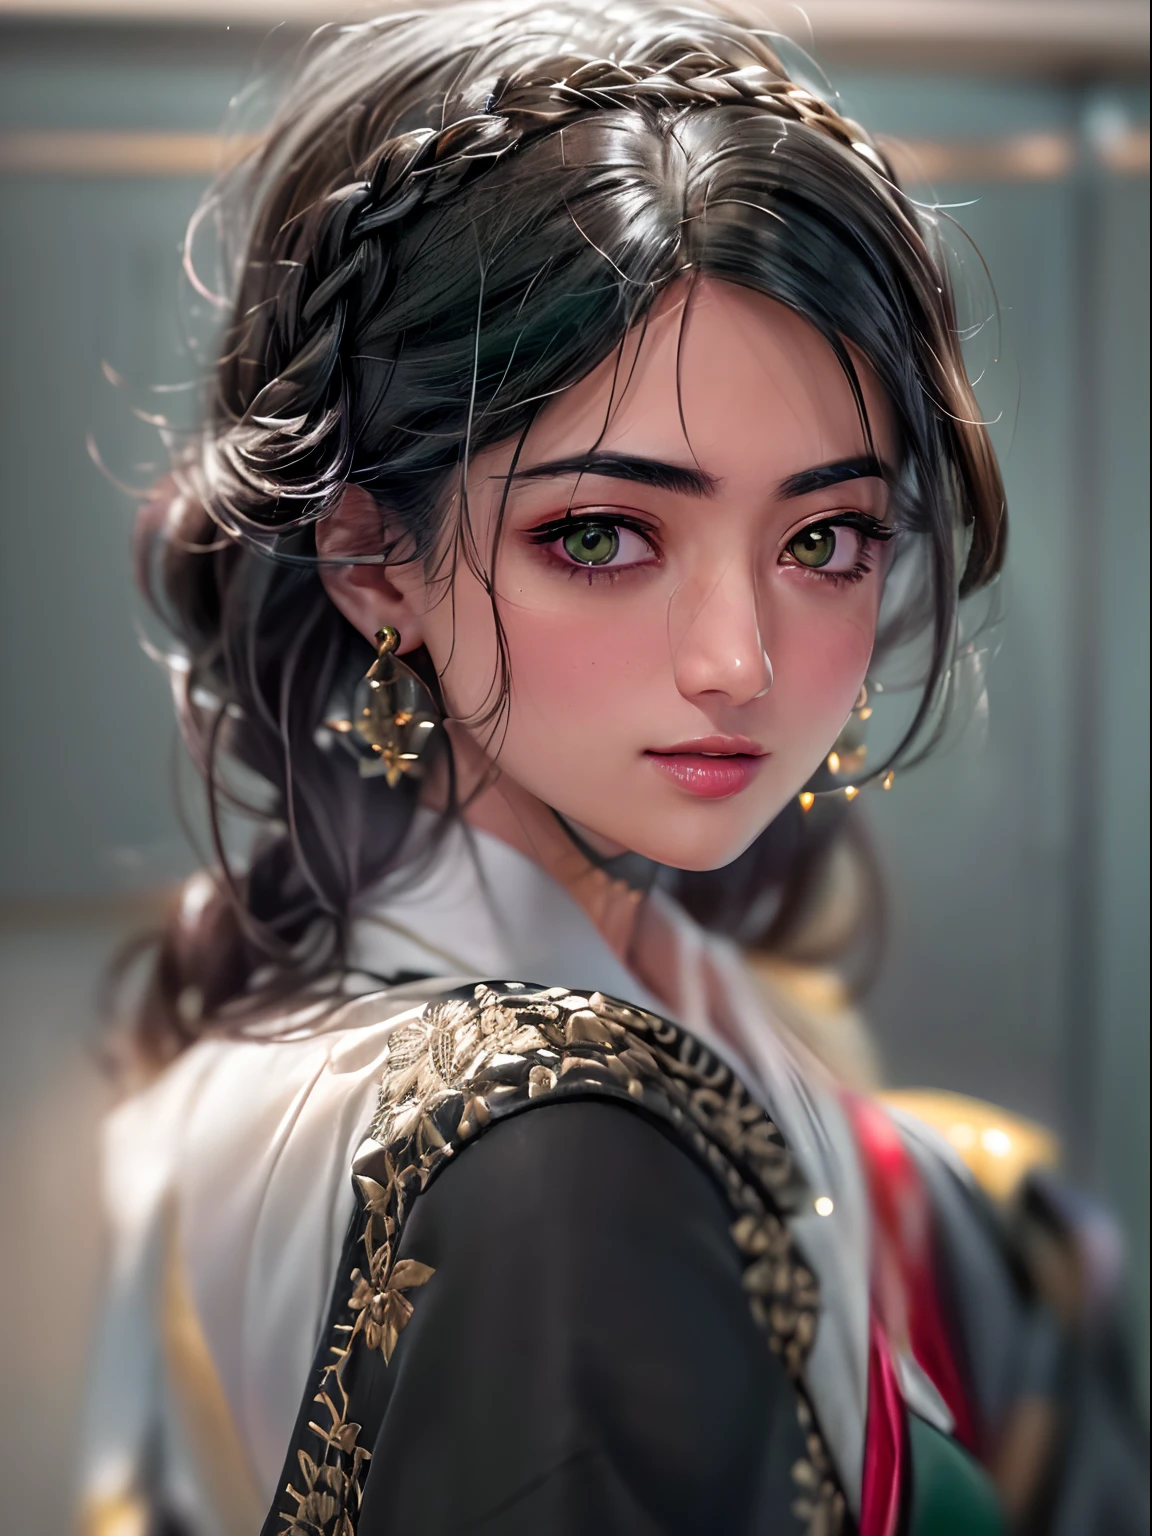 (masterpiece, high resolution:1.3), (portrait of a Rashmika woman with long hair adorned with multiple braids and red ribbons:1.3), (her striking green eyes shining brightly:1.1), (Sony Alpha 7R IV camera, known for its exceptional image quality and detail:1.2), (paired with the Sony FE 85mm f/1.4 GM lens:1.2), (her flawless skin and expertly makeup-enhanced lips:1.3), (dressed elegantly in a black blazer and white blouse:1.3), (wearing a long black skirt:1.3), (inside the elevator, with perfect illumination on her face:1.2), (the camera and lens combination ensuring sharpness and clarity in the portrait:1.2), (the blazer and skirt exuding professionalism and style:1.2), (her long hair with red ribbons adding a touch of charm:1.1), (her green eyes reflecting a sense of allure and mystery:1.1), (her facial features beautifully illuminated, capturing her essence:1.1), (the elevator creating a sense of solitude and introspection:1.1), (the portrait showcasing her poise and grace:1.1), (a moment of tranquility and self-assurance:1.1), (the Sony FE 85mm f/1.4 GM lens creating a pleasing background blur:1.1), (a timeless image that celebrates the beauty of the individual:1.1), (a portrayal of elegance and confidence:1.1), (the perfect lighting capturing every detail of her face:1.1), (a photo that captures the grace and beauty of the Japanese culture:1.1), (a moment of introspection and serenity in the confined space of the elevator:1.1), (the camera's advanced capabilities delivering exceptional image quality:1.1), (an image that tells a story of elegance and individuality:1.1), (the woman's radiant green eyes drawing viewers in:1.1)